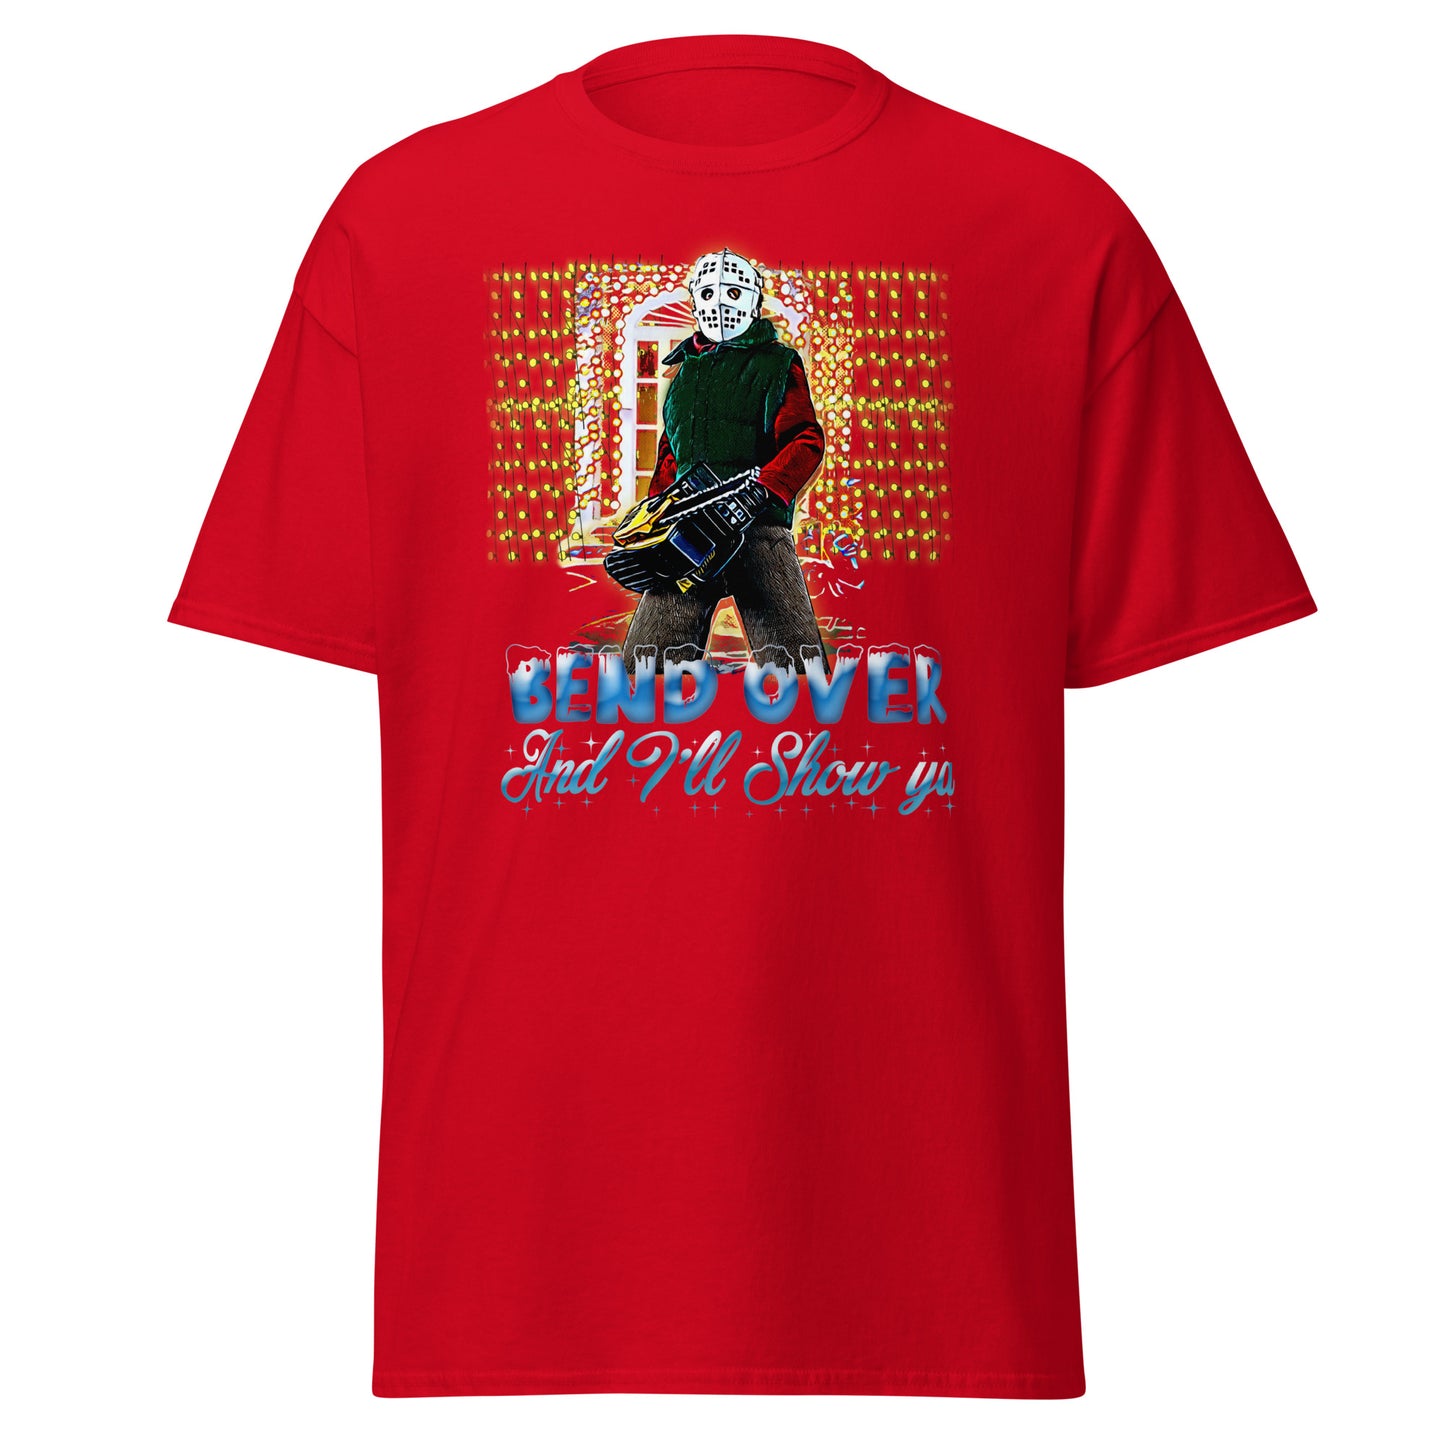 Christmas Vacation T-Shirts - Clark Griswold Quote Shirts - Red